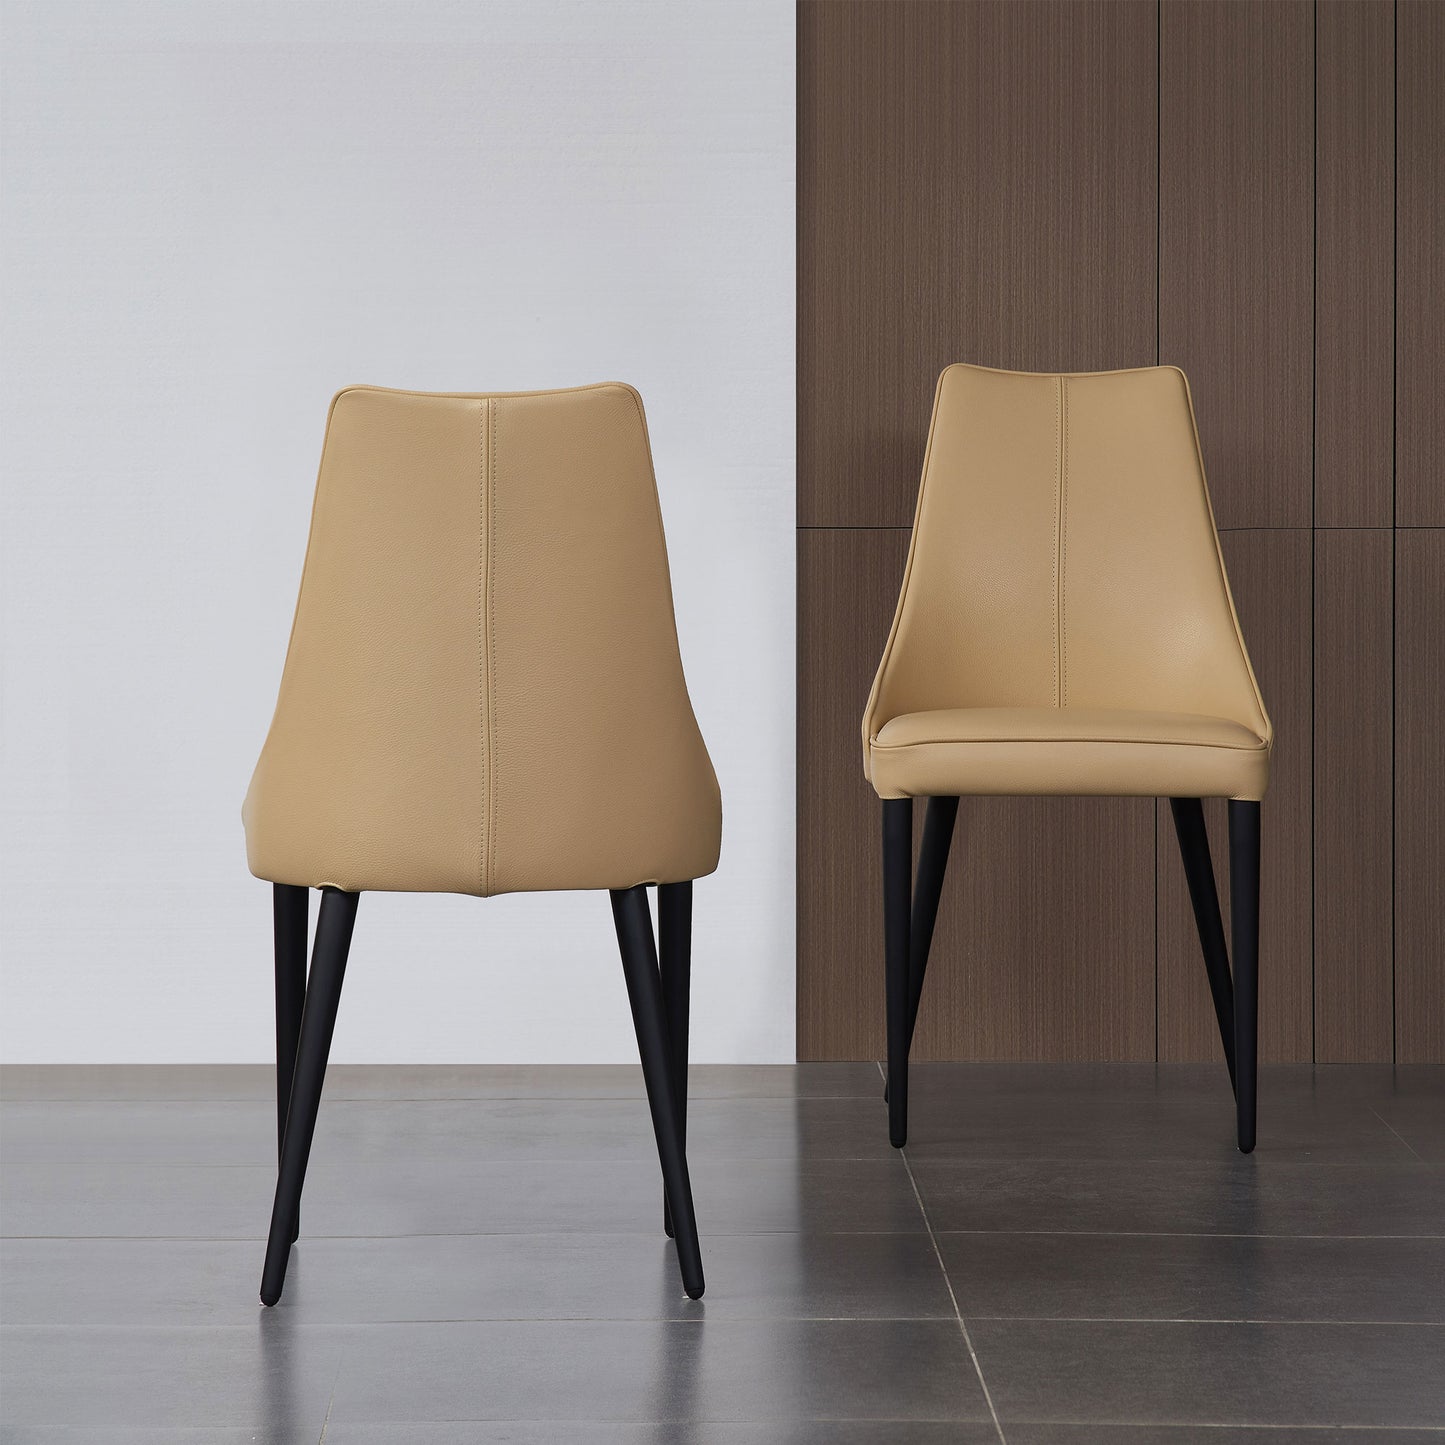 Milano Leather Dining Chair Tan by JM